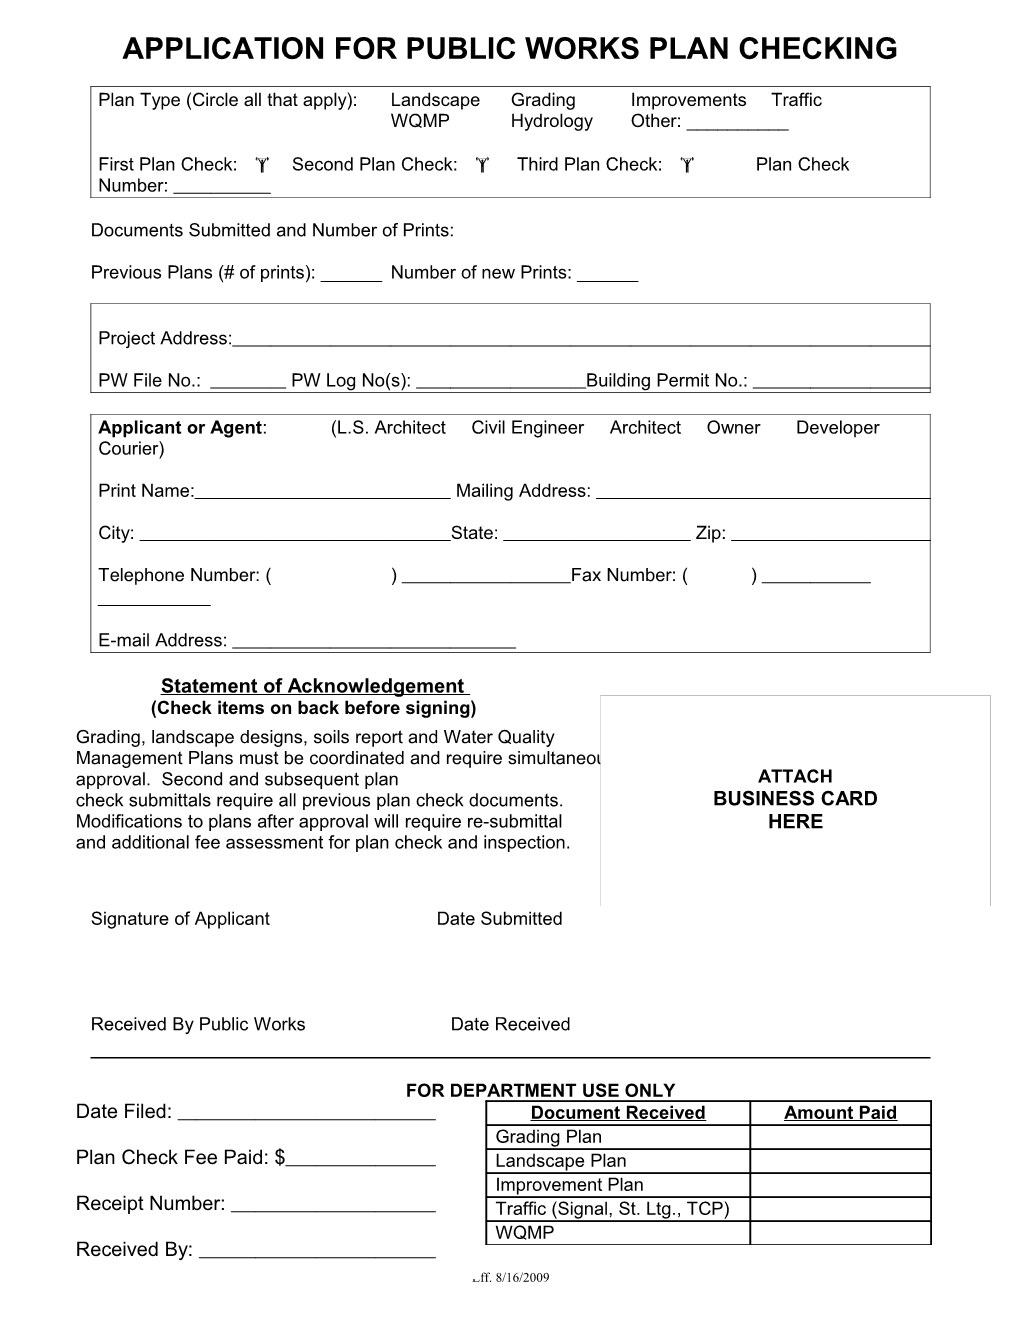 Application for Public Works Plan Checking